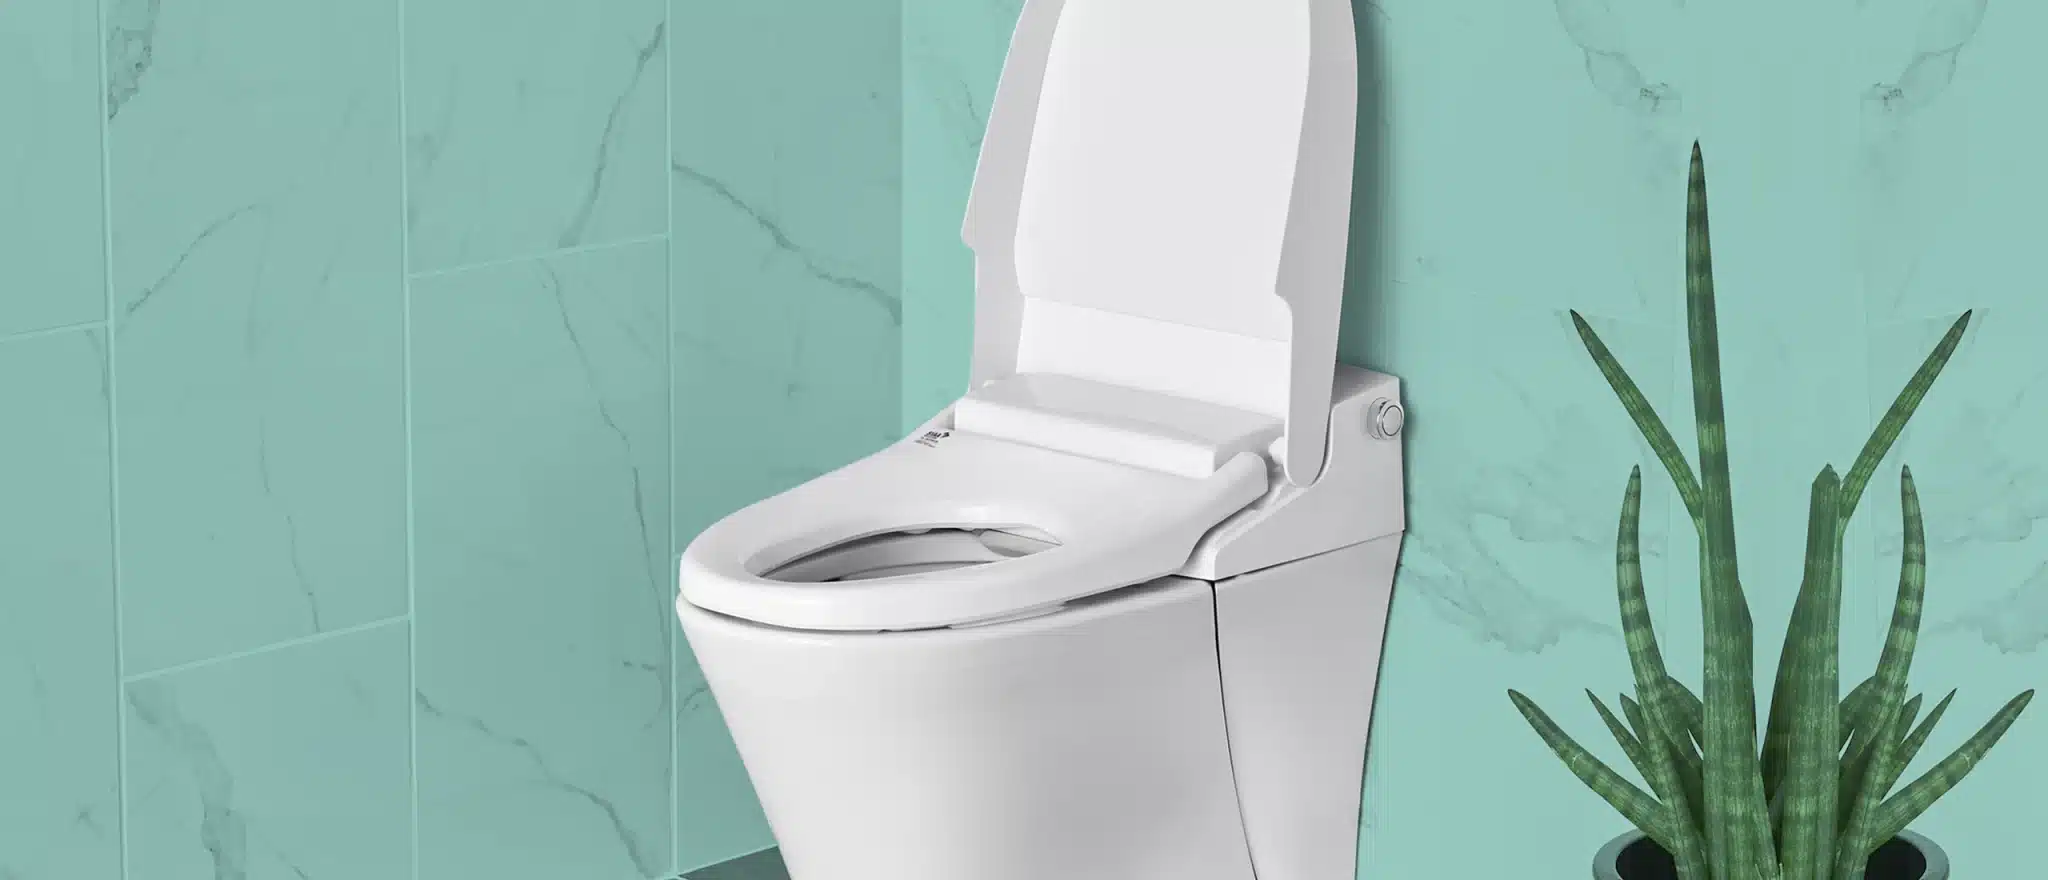 The Best Smart Toilets You Can Buy for an Ascended Bathroom Experience